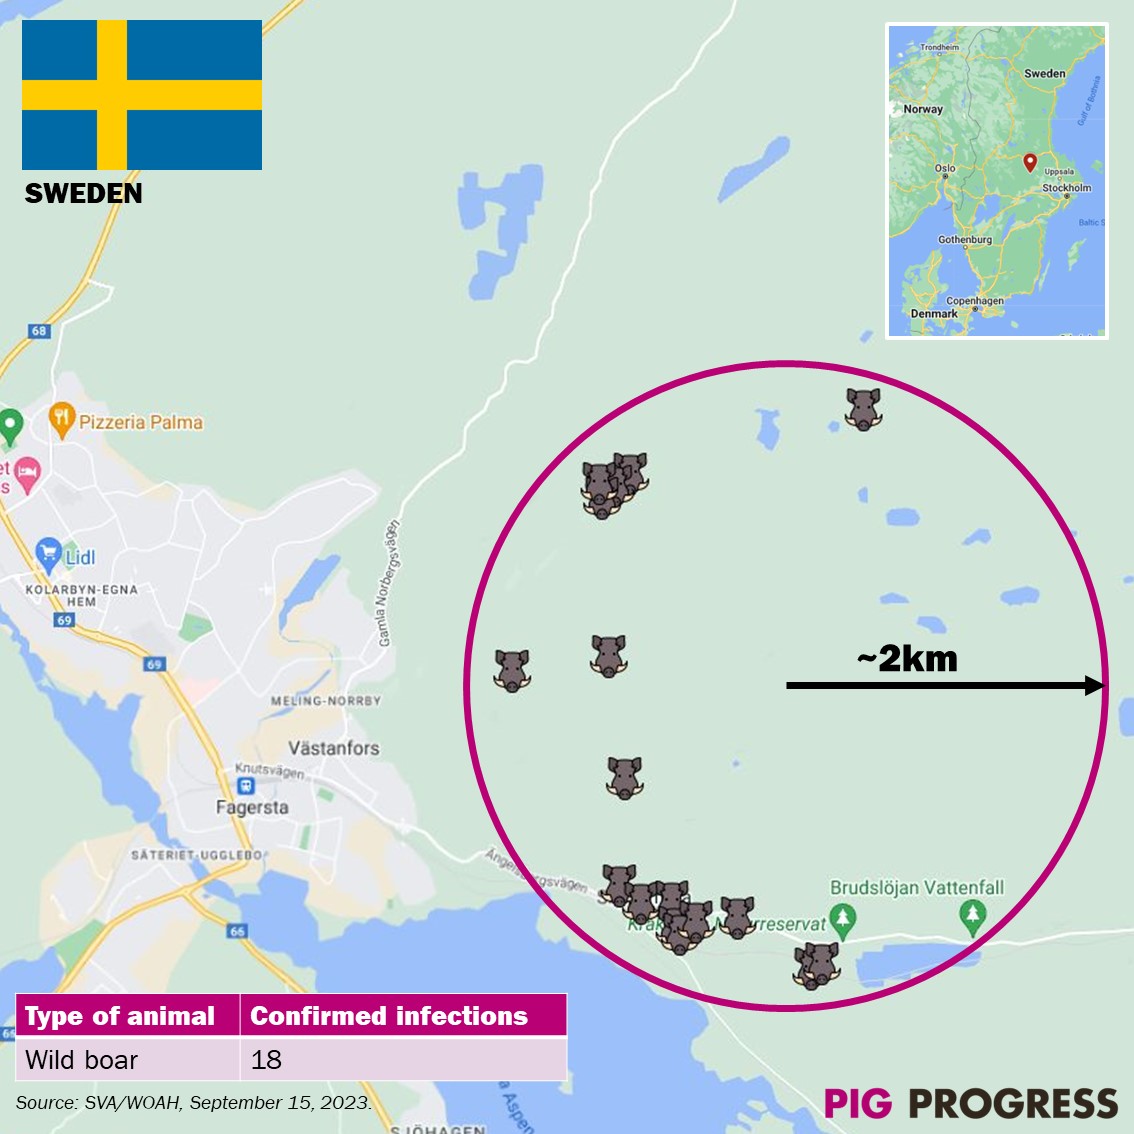 Update about the #ASF situation in Sweden 🇸🇪. The authorities have found 18 infected wild #boar carcasses, all within a 2km radius east of Fagersta. More finds are being expected. The map shows the most recent situation - follow @PigProgress to learn about the latest updates.